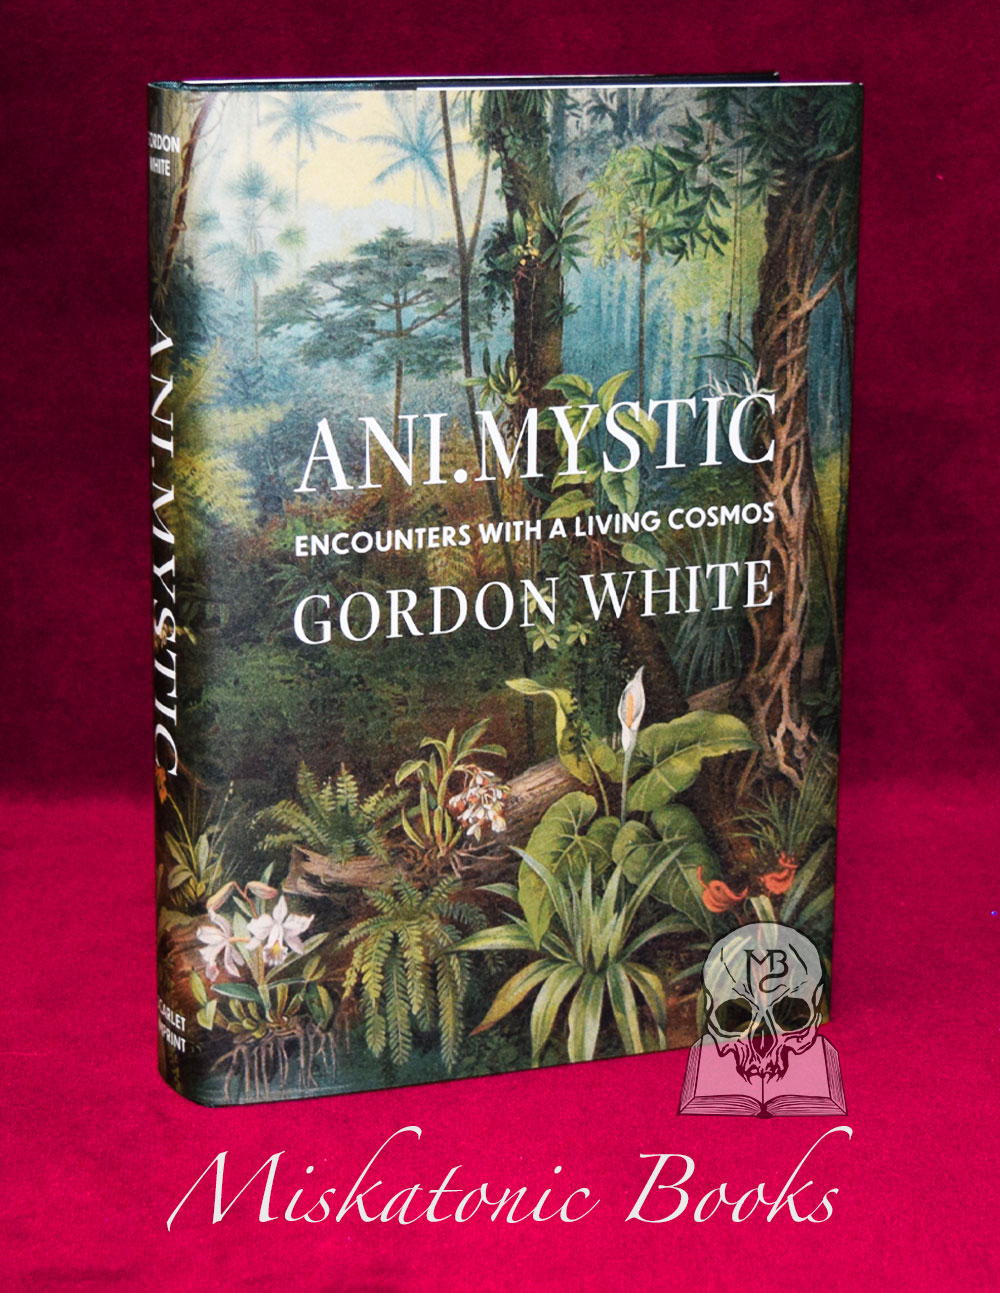 ANI.MYSTIC by Gordon White - Limited Edition Hardcover